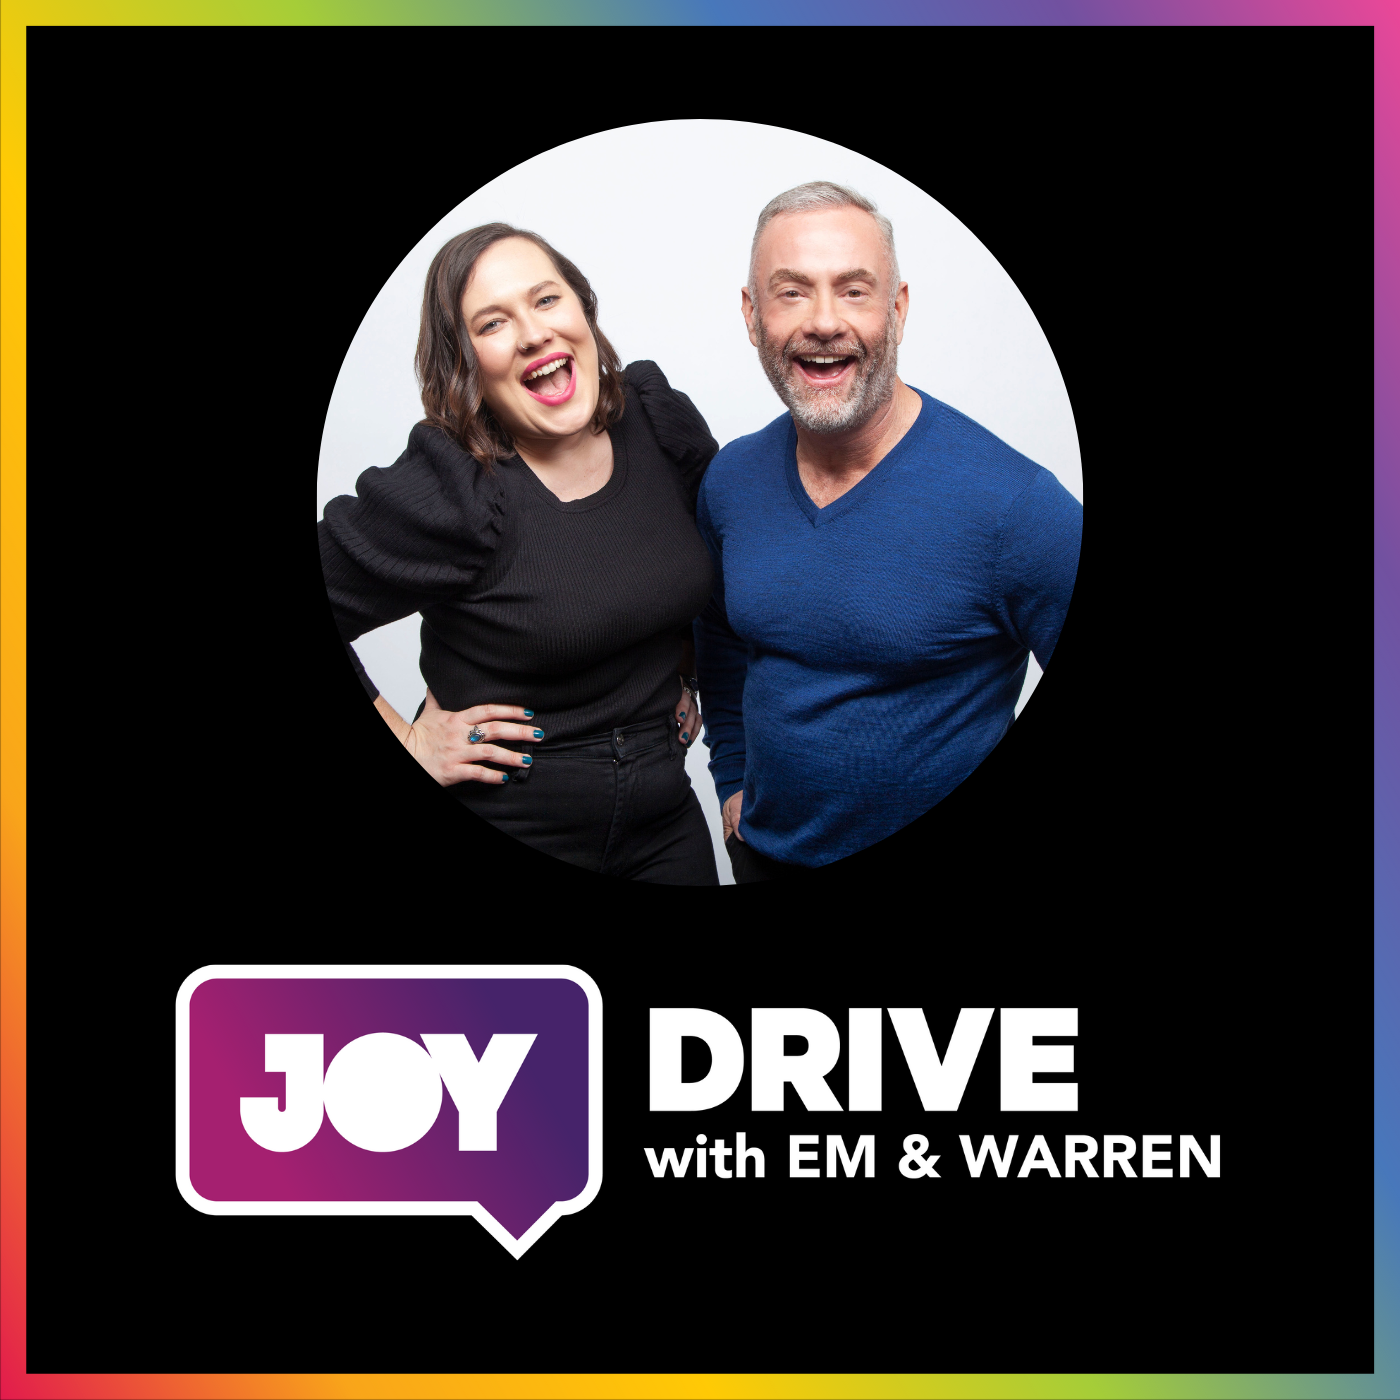 Clare Collins x JOY Drive: Chewing Gum and Some Surprising Benefits. 